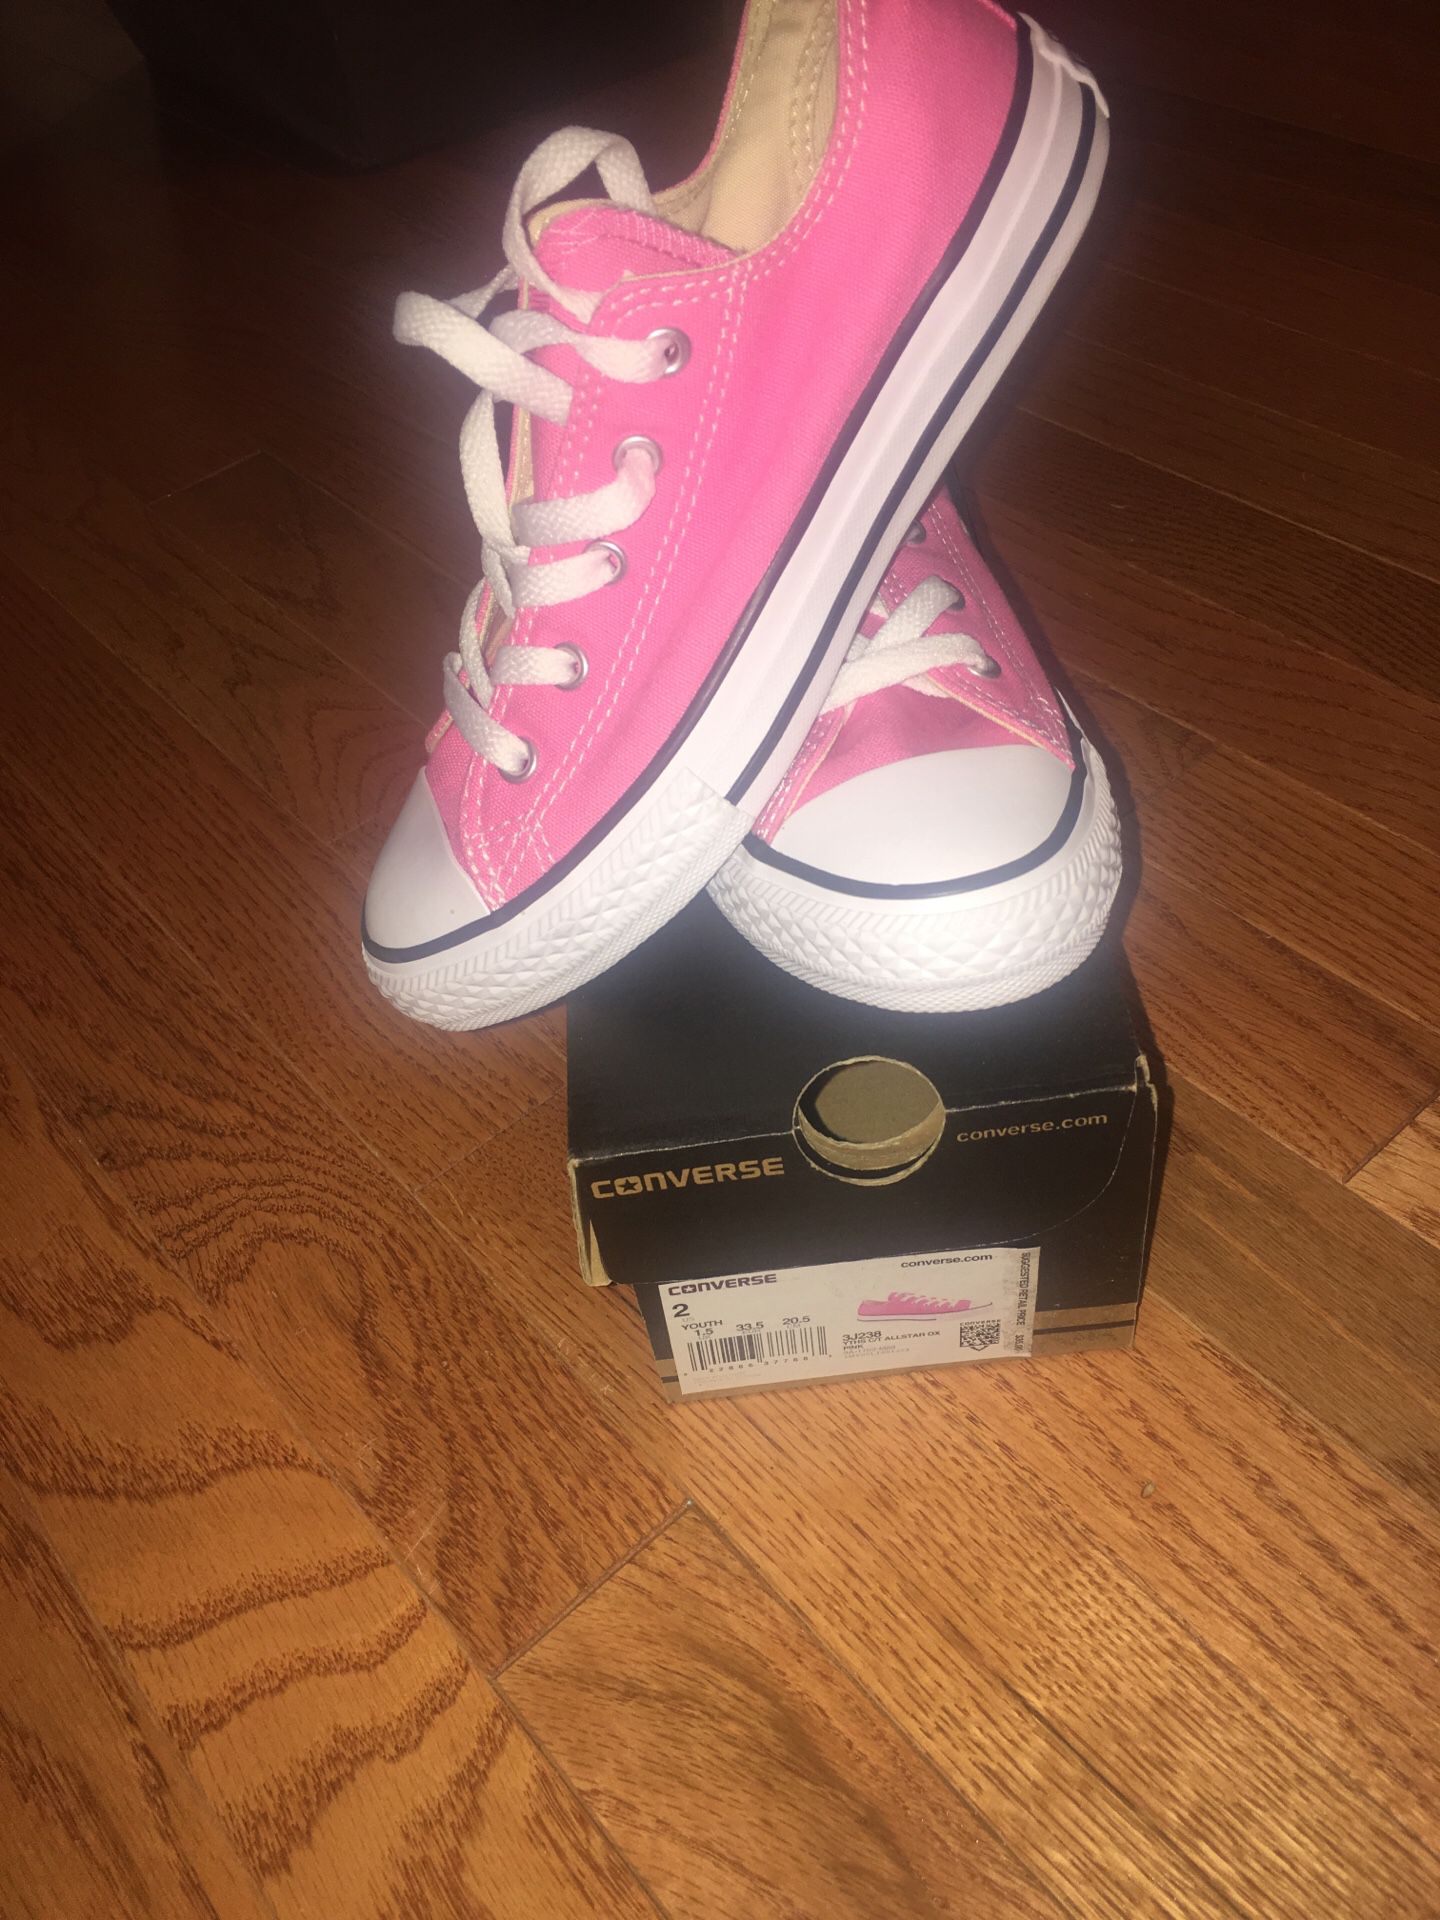 New in box size 2 converse